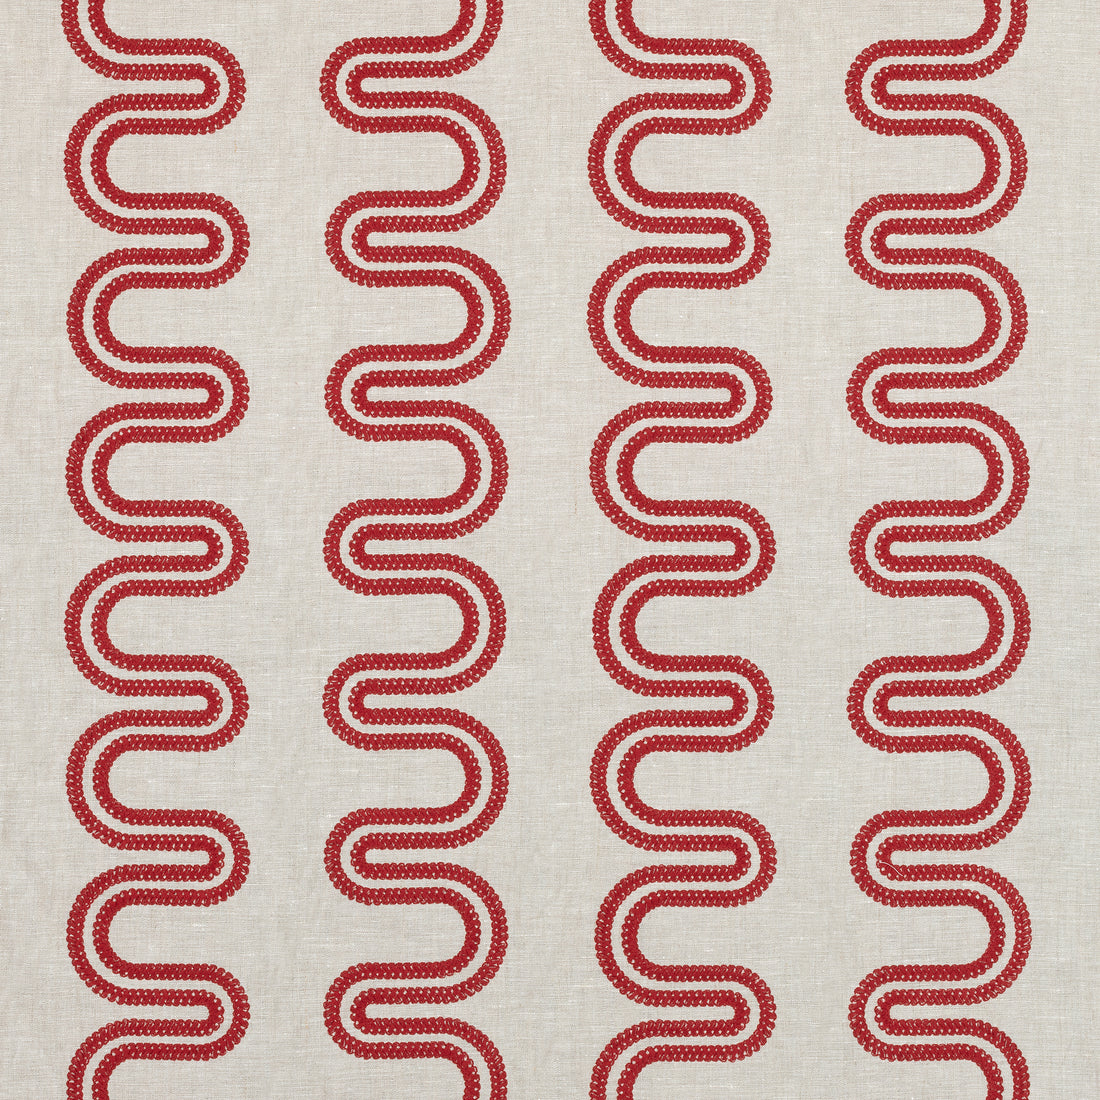 Herriot Way Embroidery fabric in raspberry on flax  color - pattern number AF9640 - by Anna French in the Savoy collection